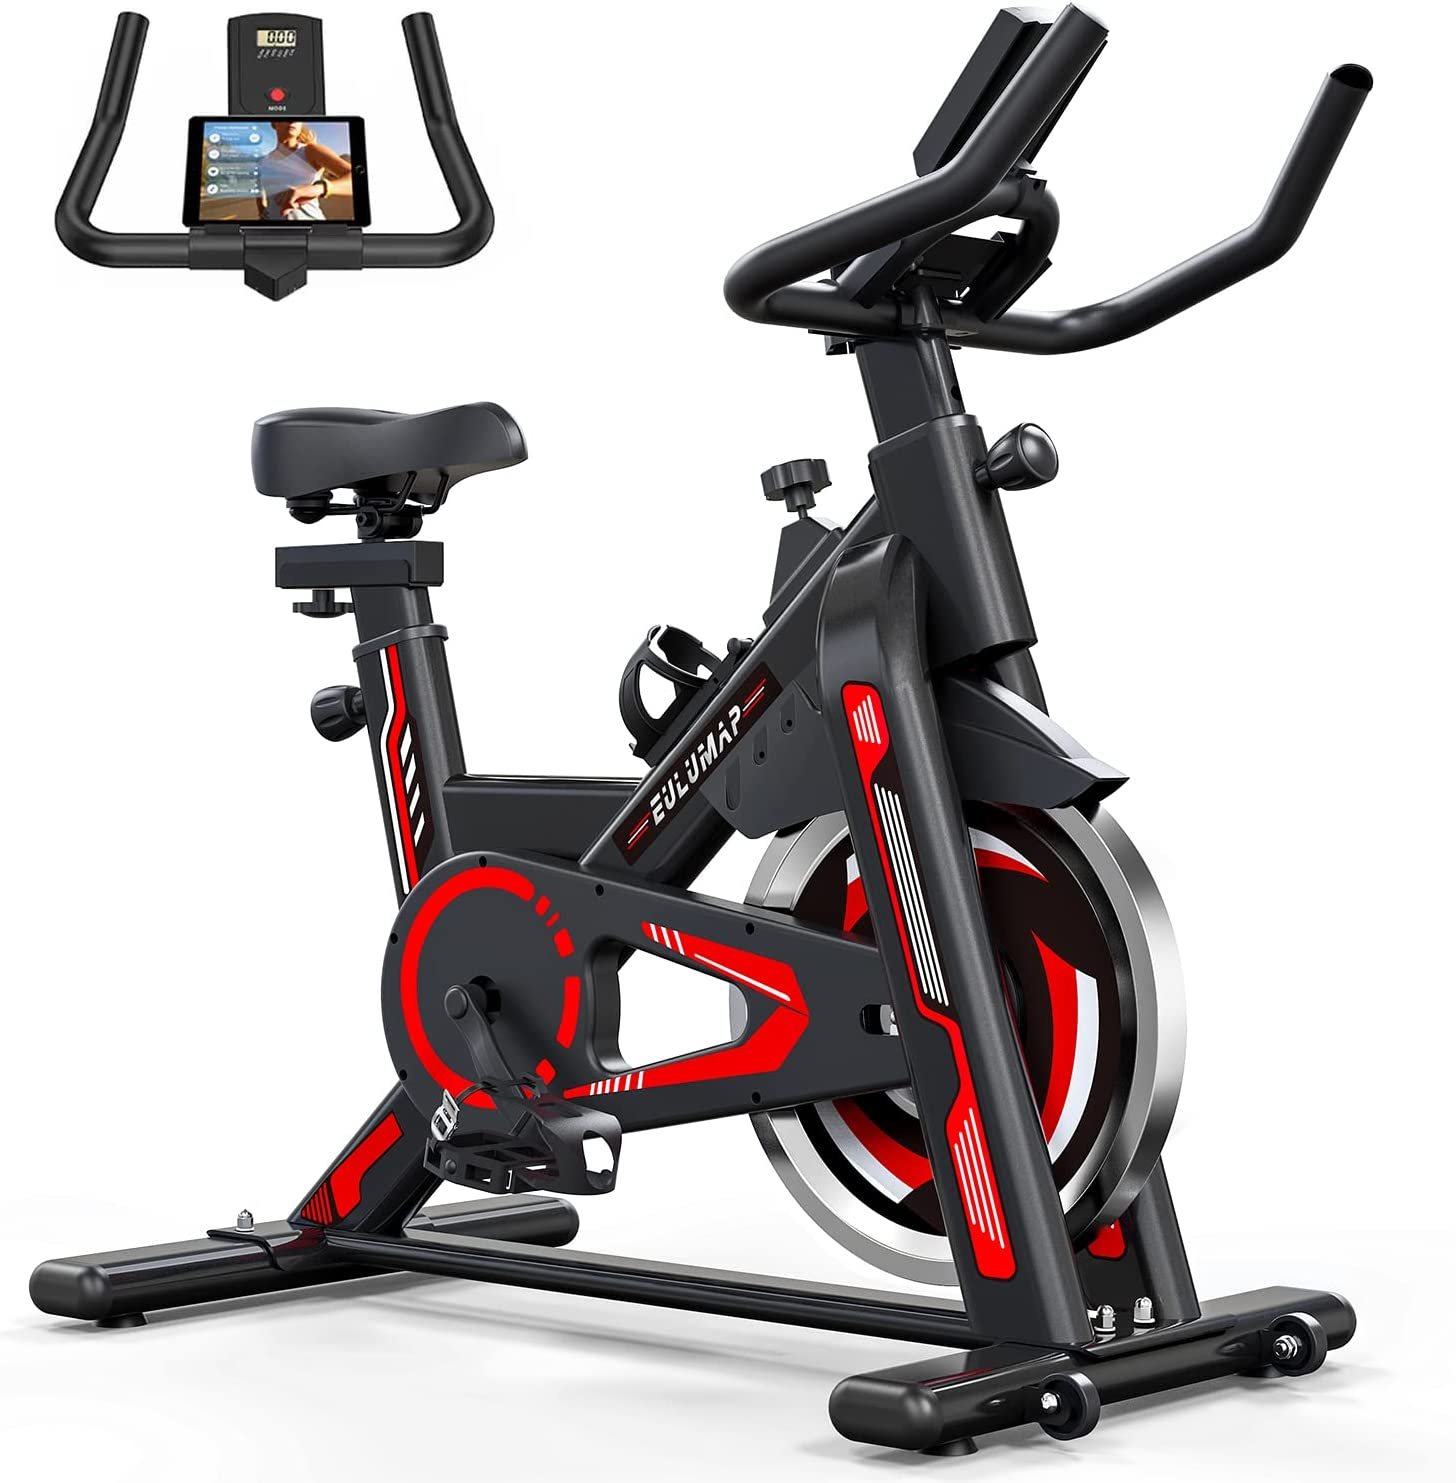 The Eulumap Stationary Indoor Cycling Bike